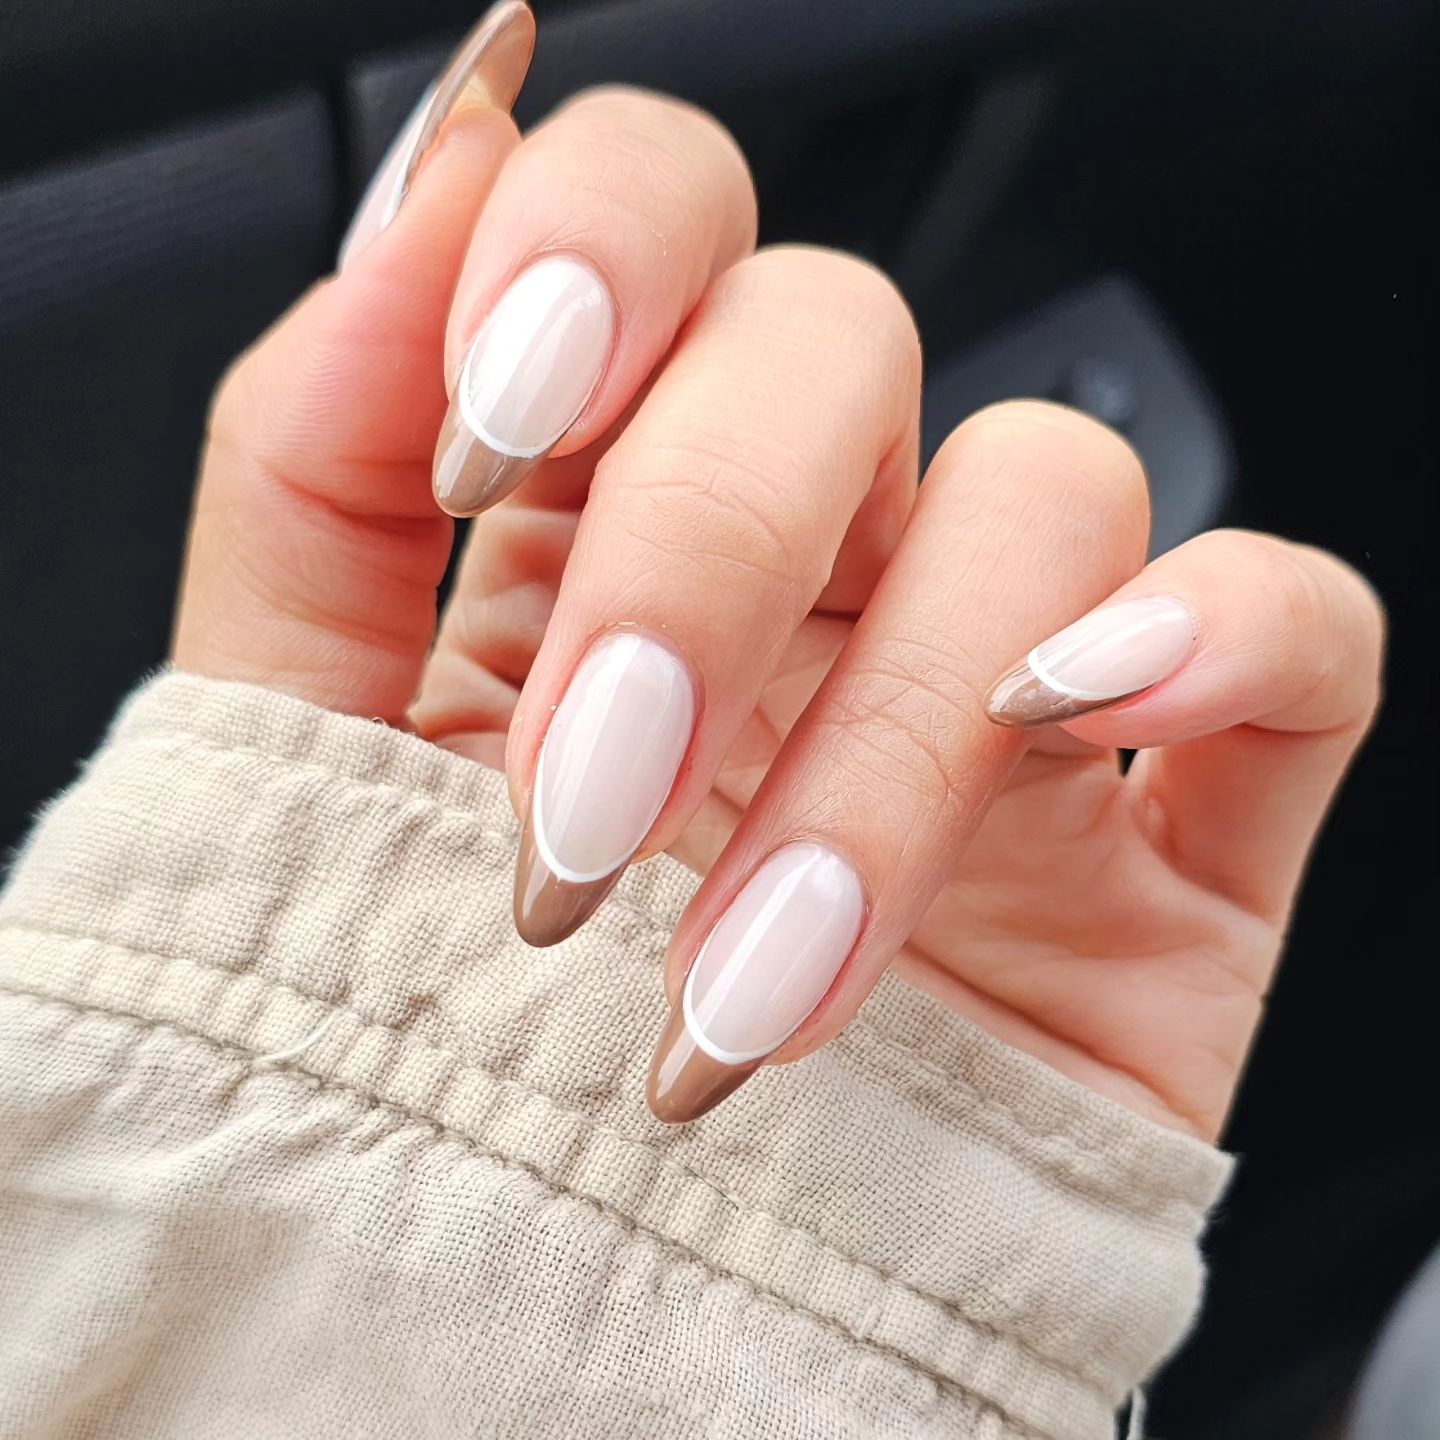 Buy Secret Lives Acrylic Press on Designer Artificial Nails Extension Almond  Shape Nude Pink Silver White Pink Curve Design 24 pcs Fake Nails Set with  Kit Online at Best Prices in India -